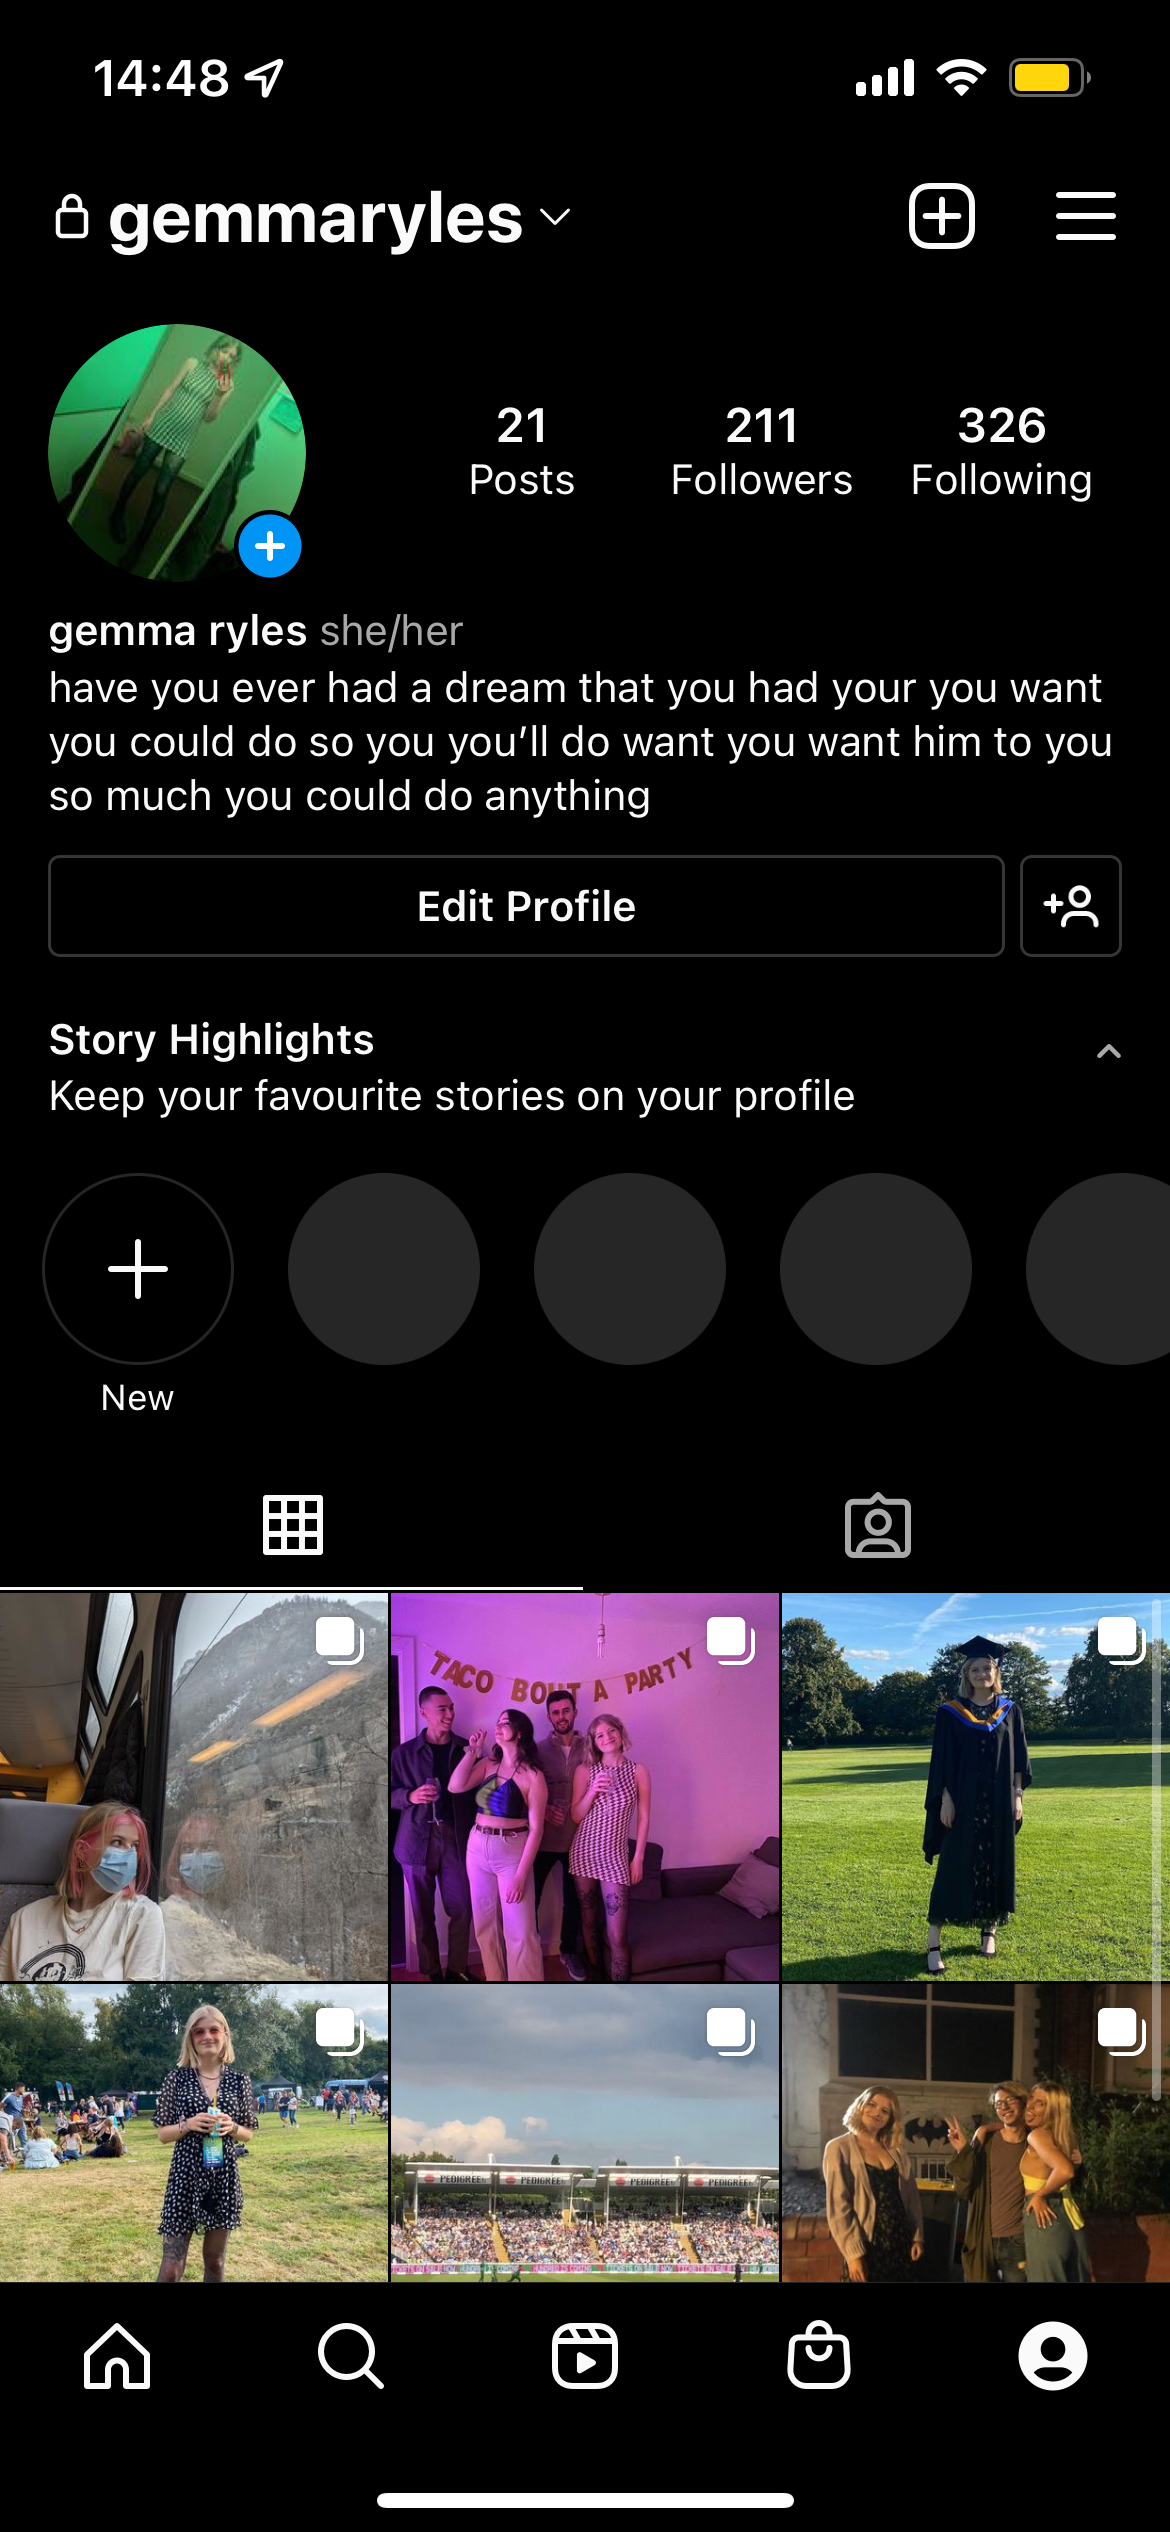 Go into your Instagram app and go into your account page